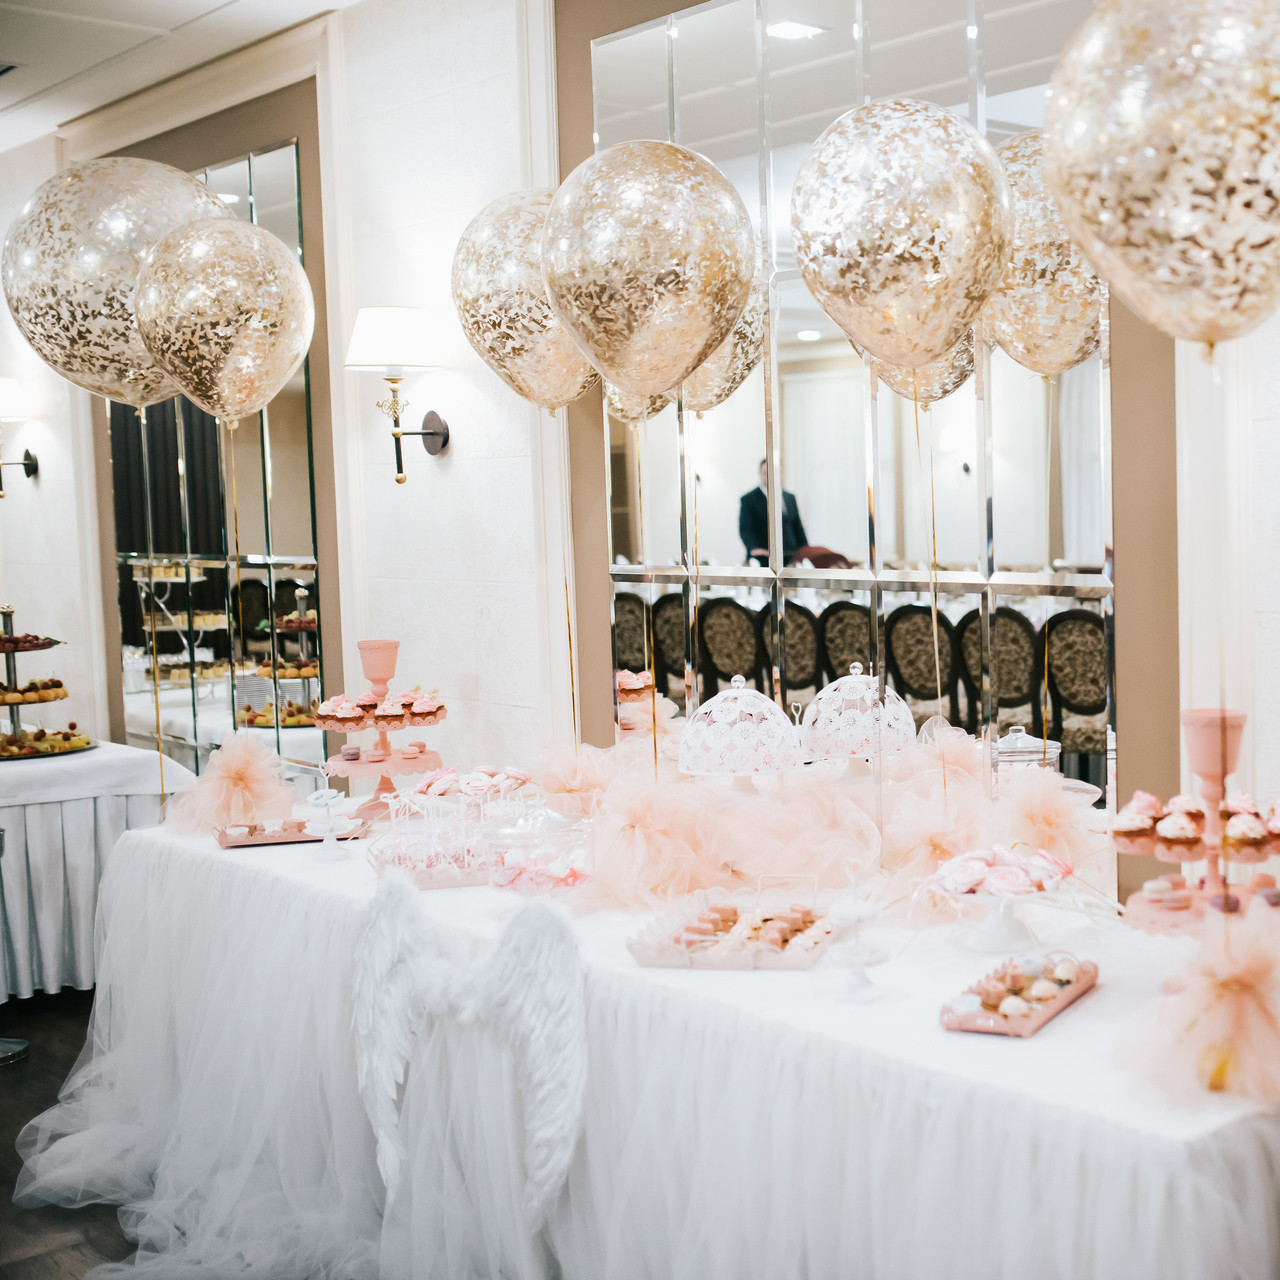 Balloon Decorations For Weddings
 15 Magnificent Wedding Decoration Ideas